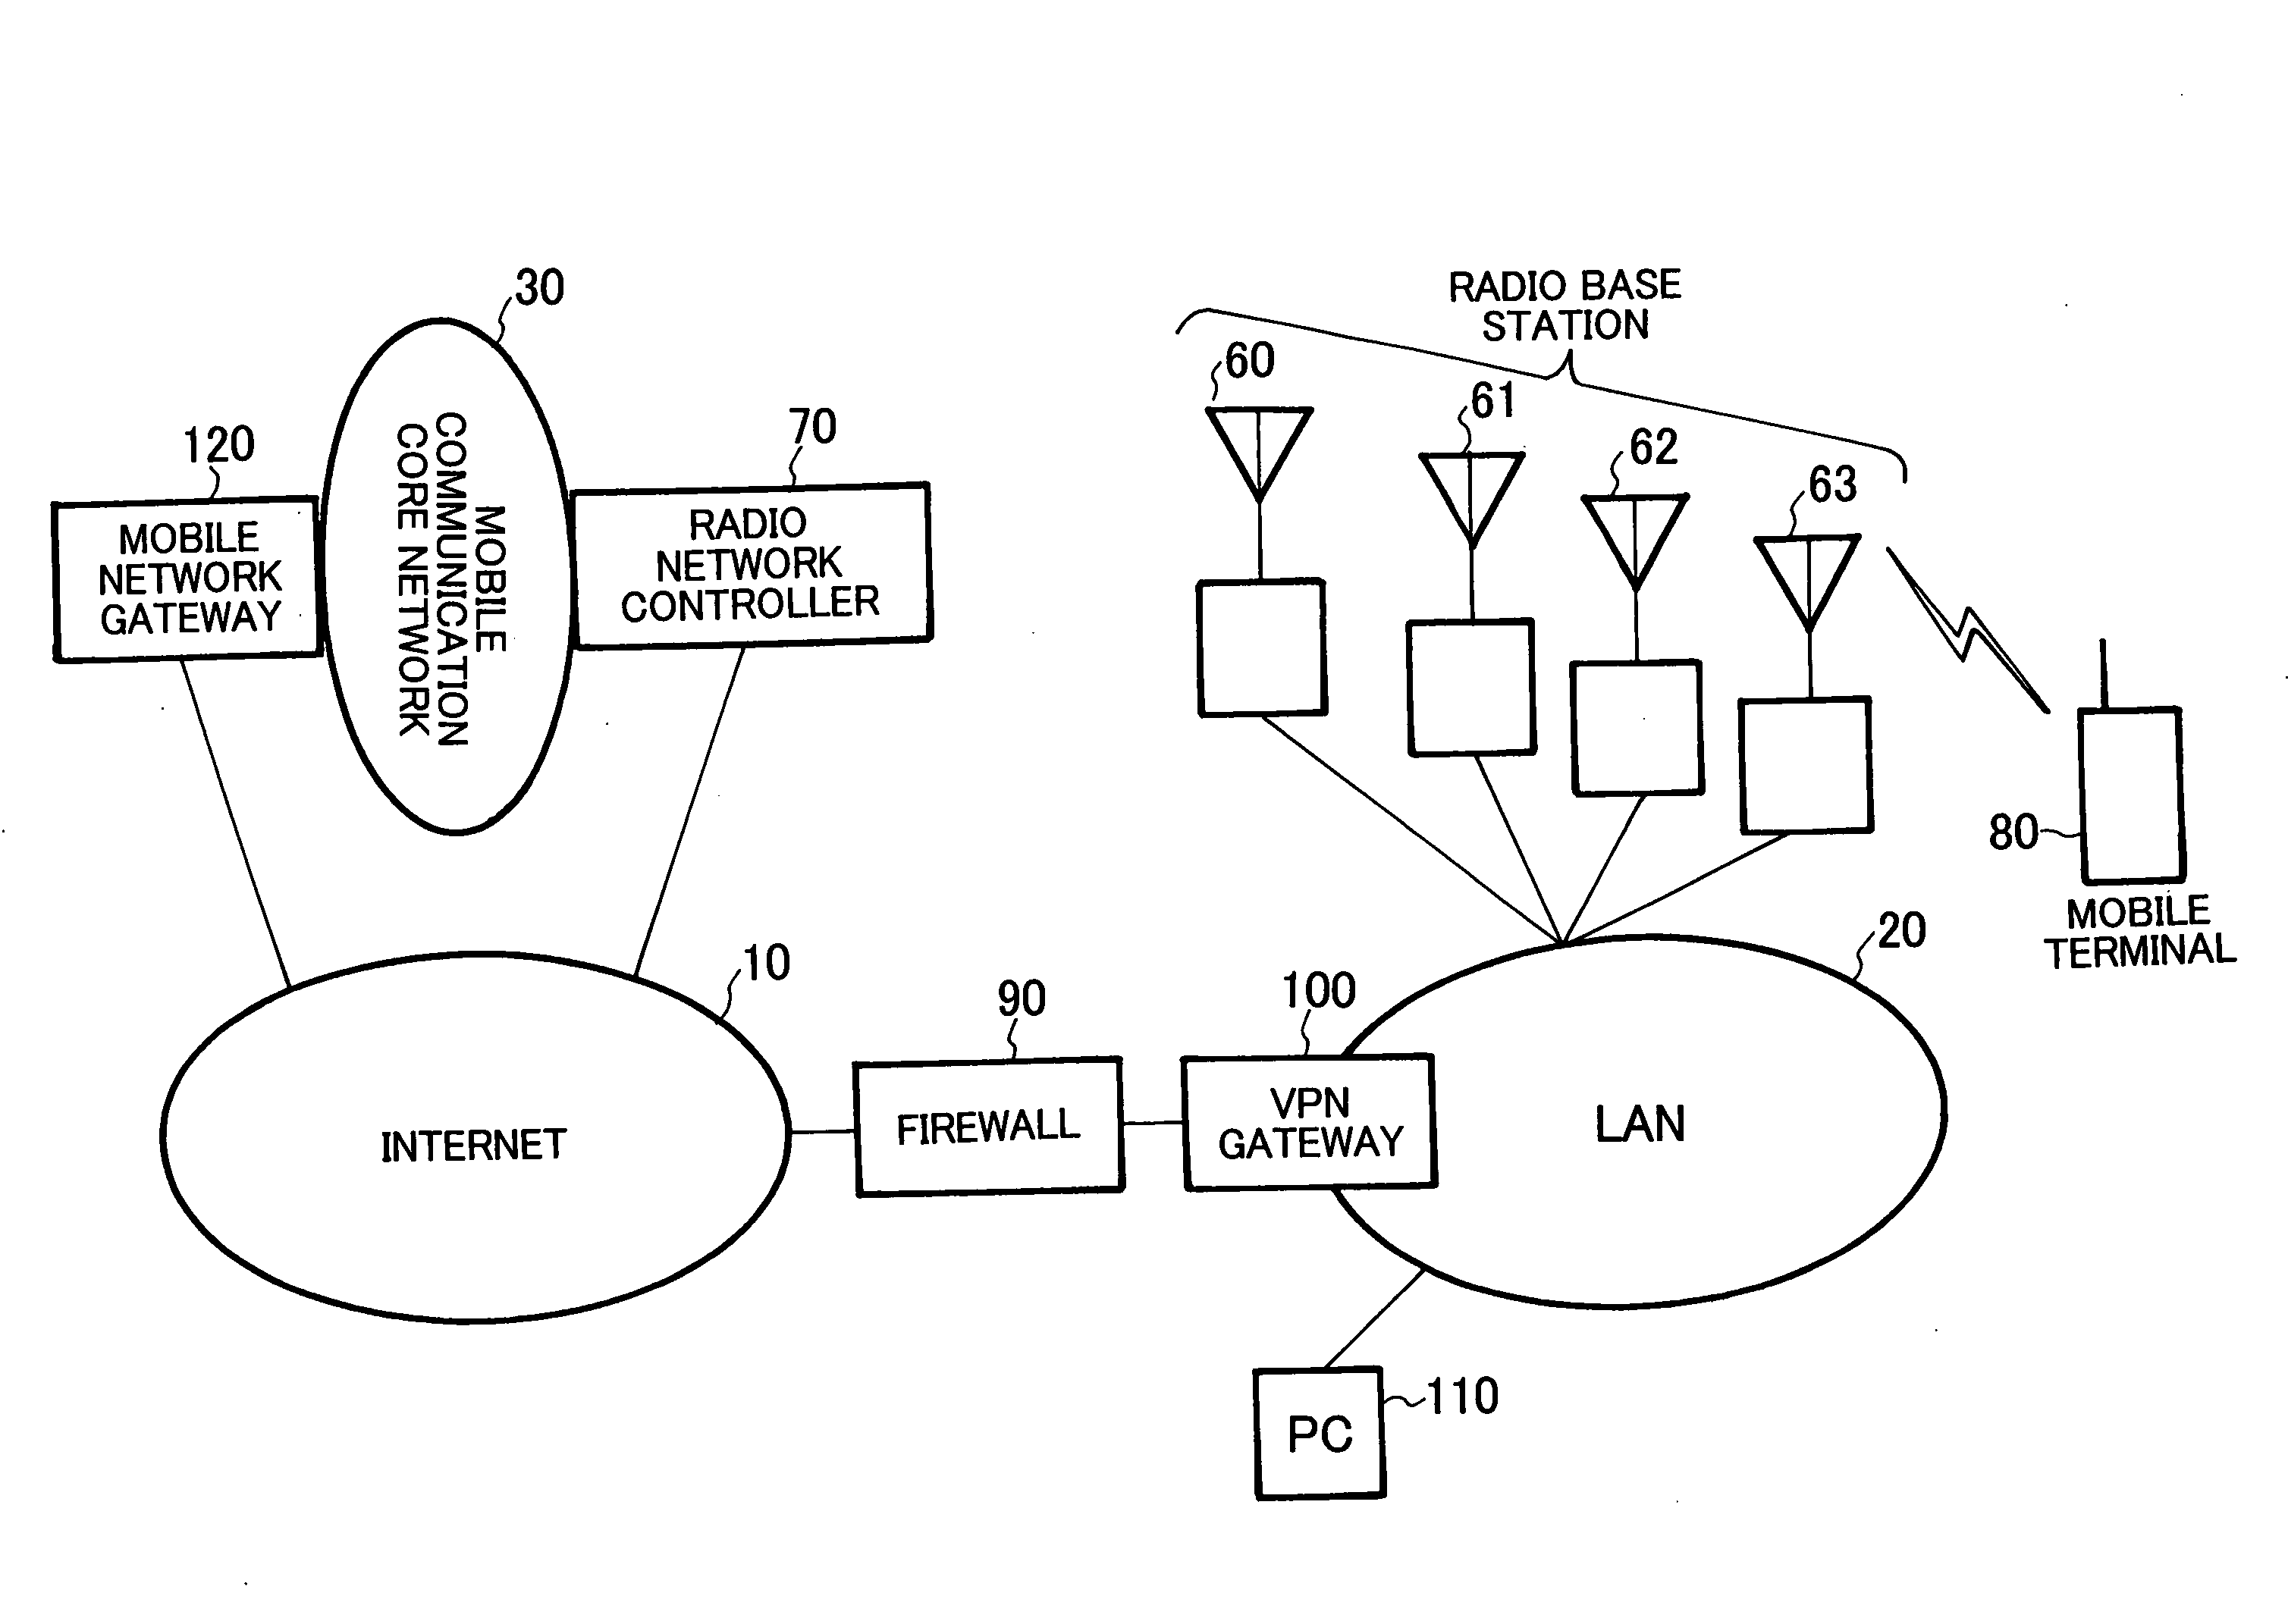 Mobile communication system using private network, relay node, and radio network controller